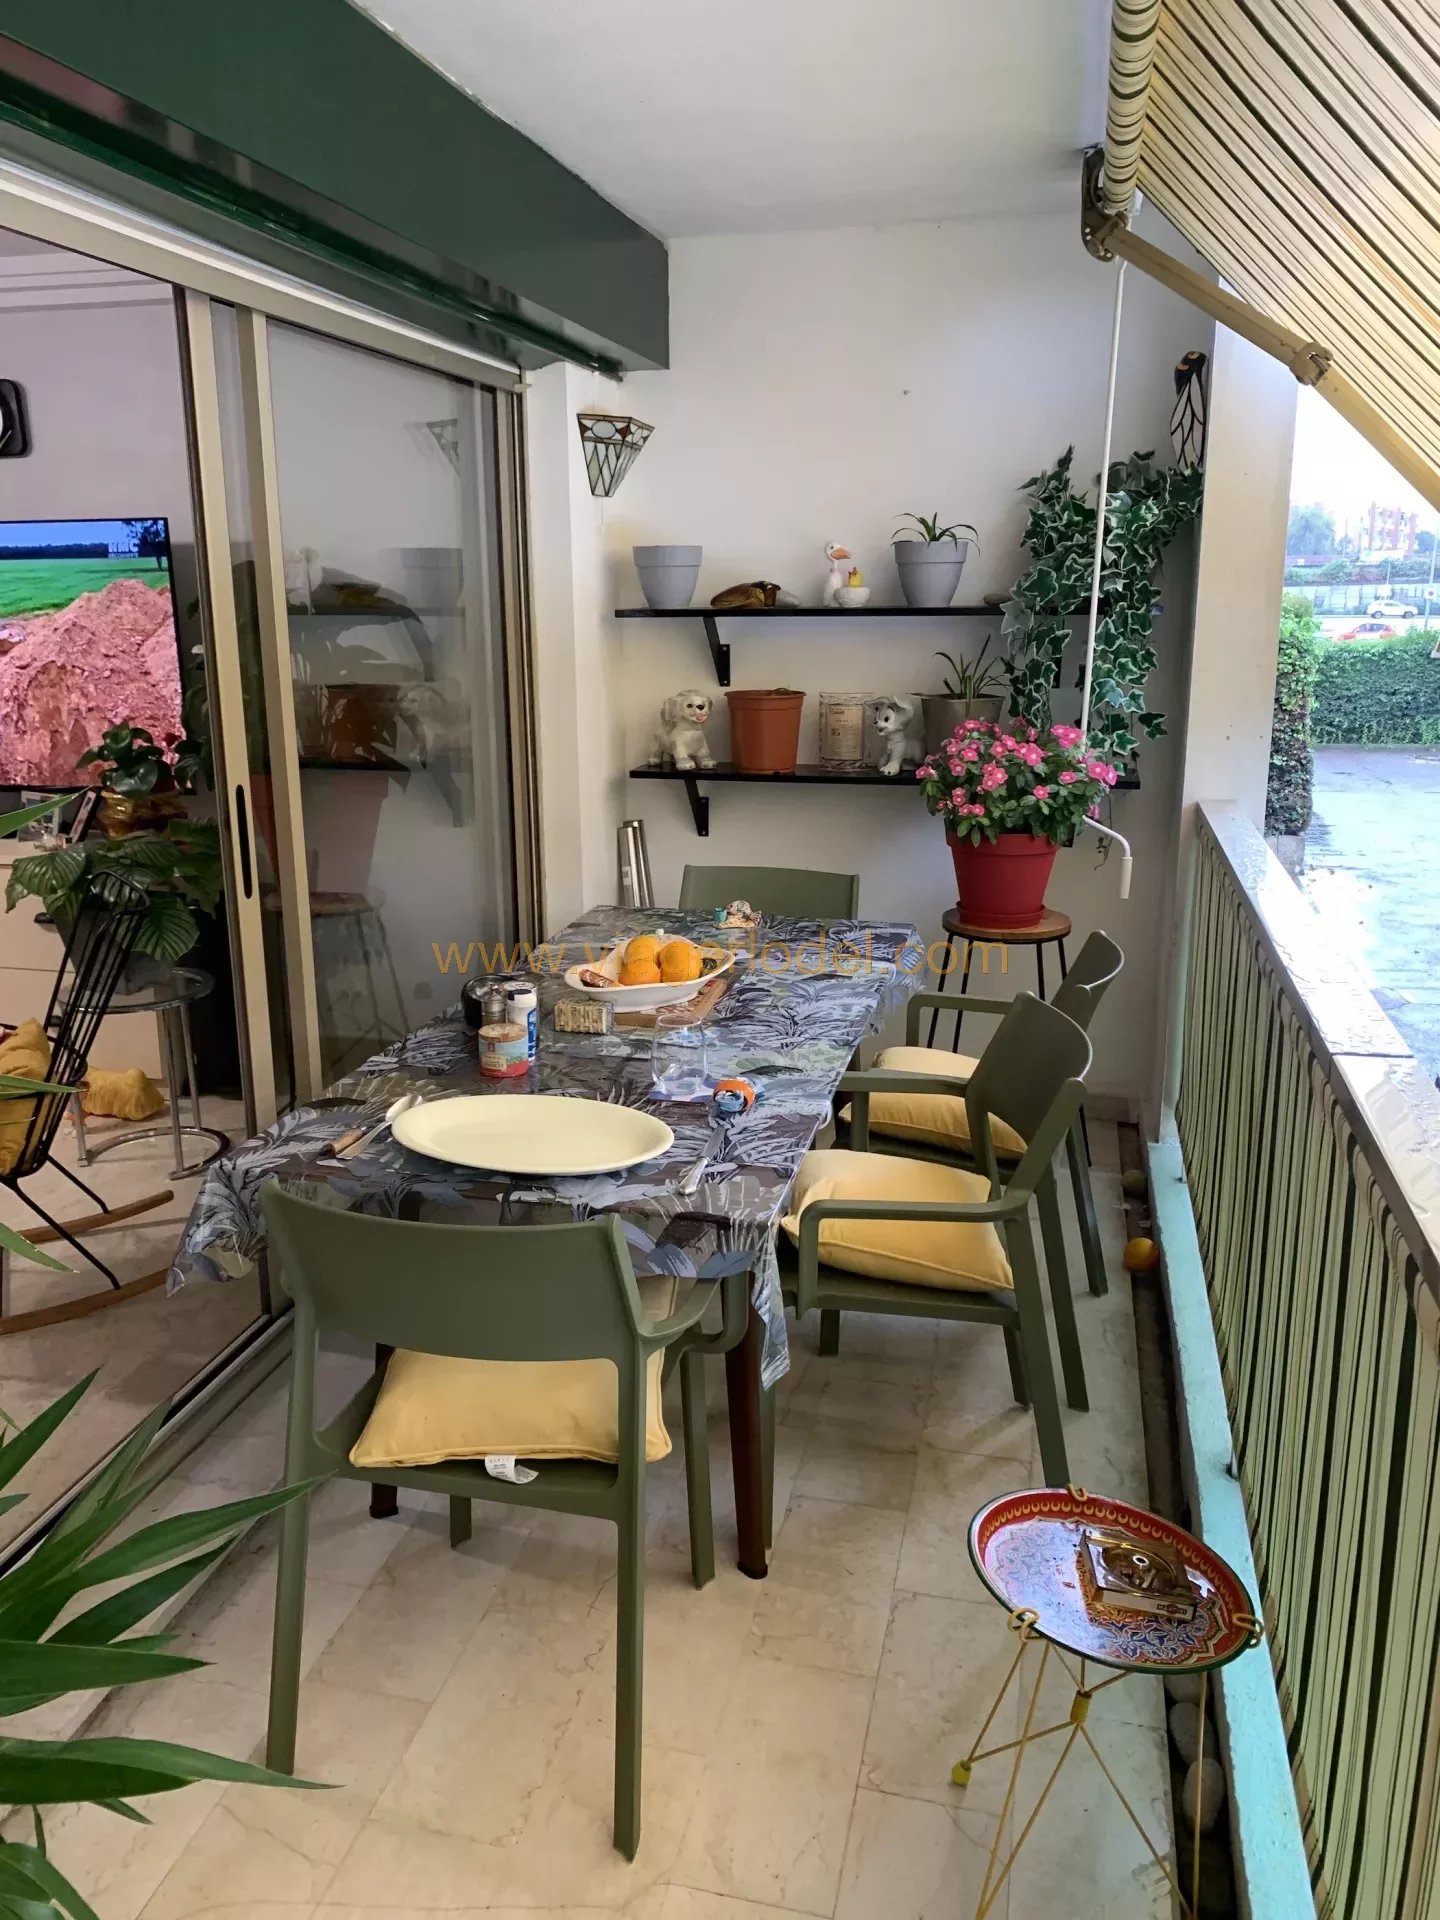 Ref. 9277 - LIFE ANNUITY - CAGNES SUR MER (06) Occupied 2-room flat